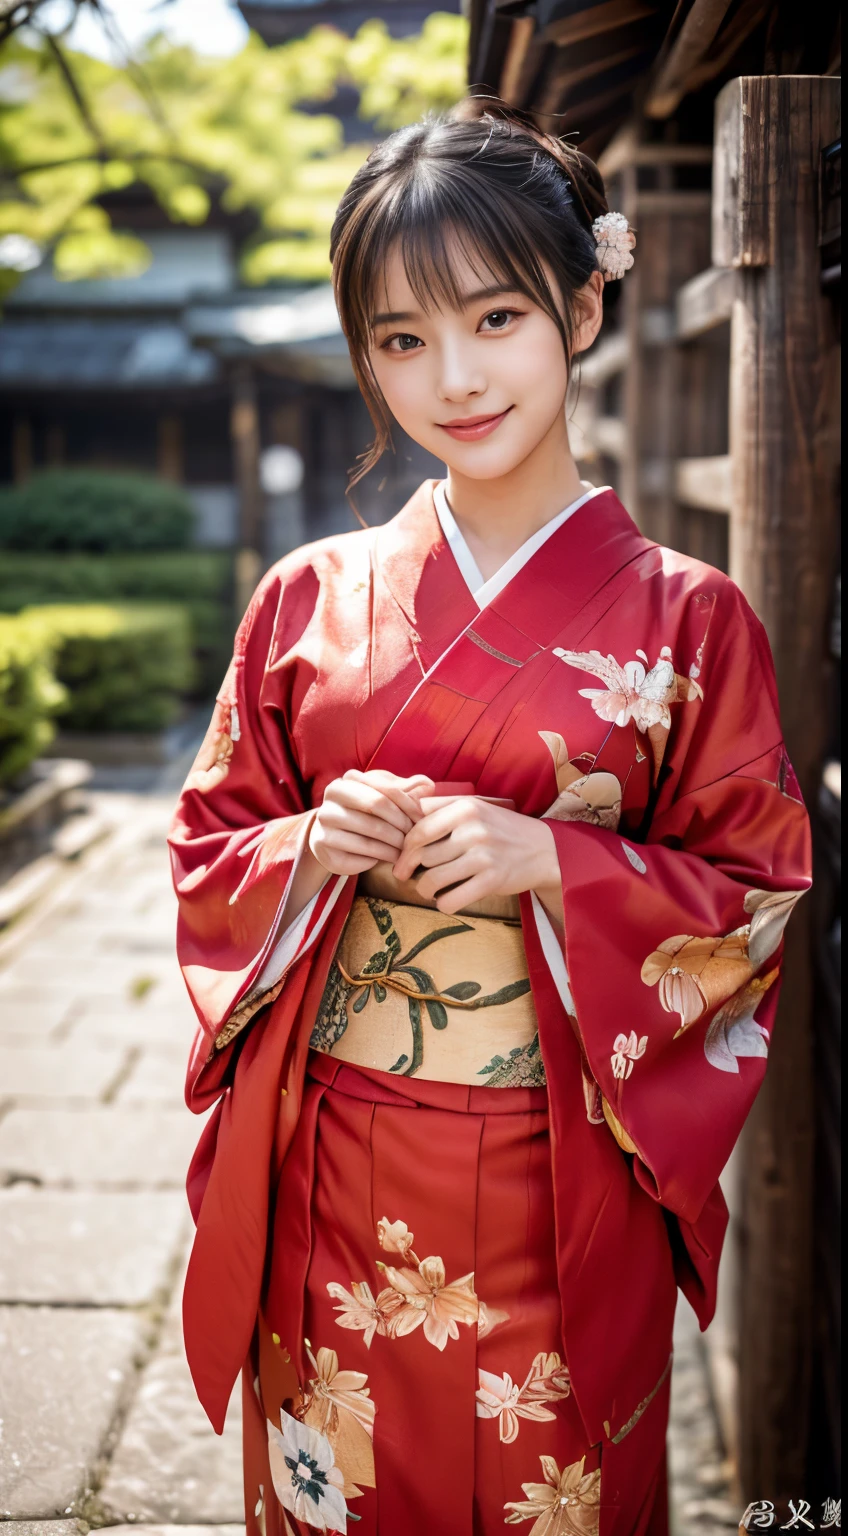 (red kimono:1.2)、(Kyo-Yuzen:1.2)、(Floral pattern in Japanese style:1.0)、(furisode:1.5)、(Japanese traditional classic pattern:1.2)、or、(top grade)、One woman、sixteen years old、full body Esbian、A darK-haired、(reallistic:1.7)、((Top image quality))、absurderes、(超A high resolution)、(Photorealsitic:1.6)、Photorealsitic、octane renderings、(hyper realisitic:1.2)、(photorealiscic face:1.2)、(8K)、(4K)、(​masterpiece)、(realistic skin textures)、(illustratio、Cinematographic lighting、wall-paper)、(beautidful eyes:1.2)、((((face perfect))))、(Cute face like an idol:1.2)、(is standing)、shrines、tori ready、(1 moon)、Detailed cute face、Realistic Beauty、A smile、